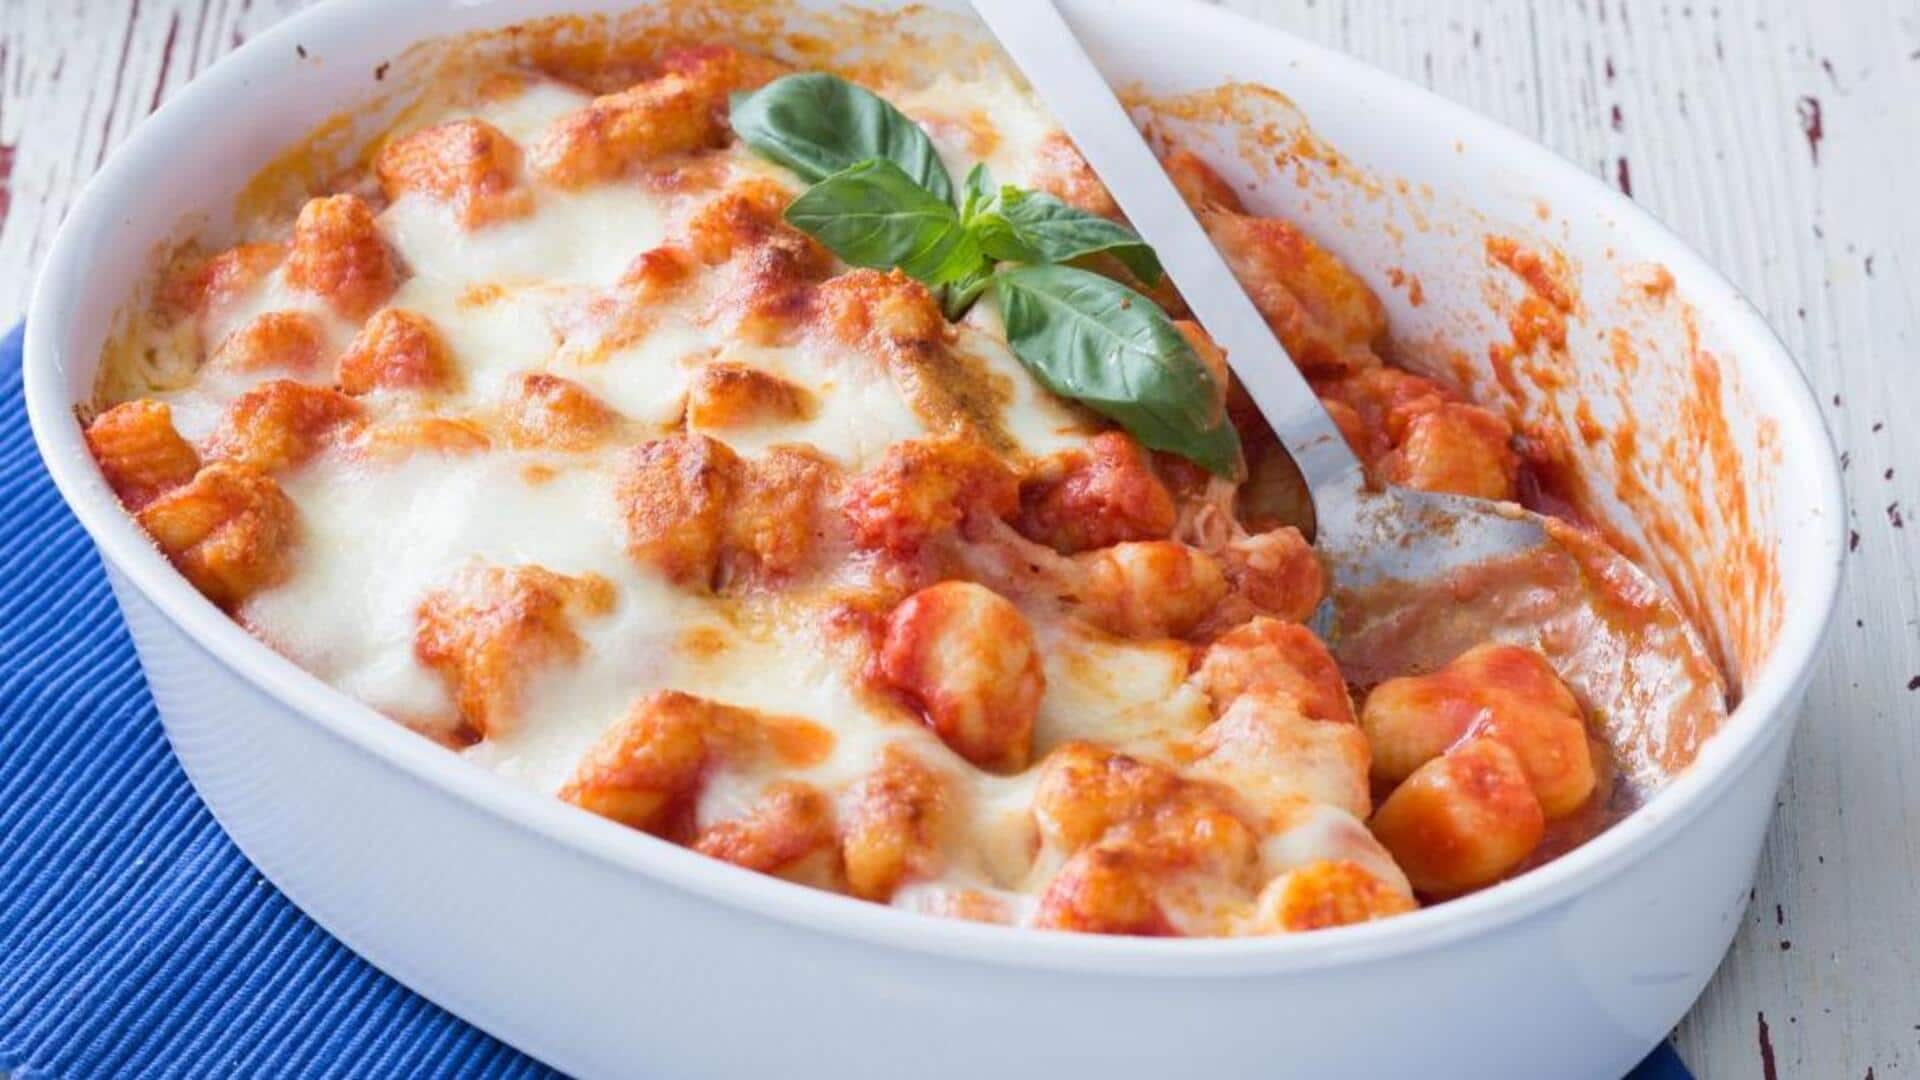 Impress your guests with this Italian gnocchi sorrentina recipe